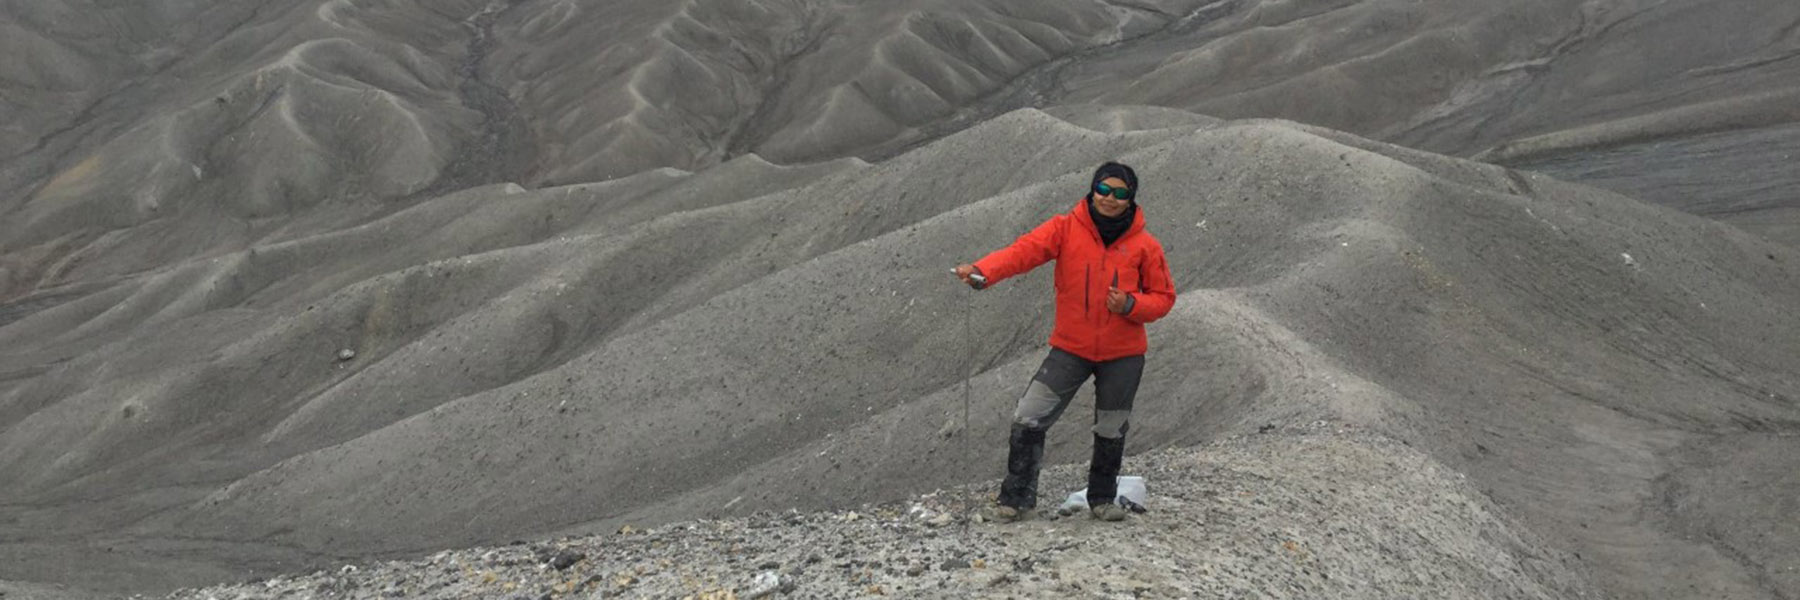 Chimira Andres in the Haughton Impact Structure, in Devon Island, Nunavut holding a permafrost probe during a 2019 summer fieldwork campaign